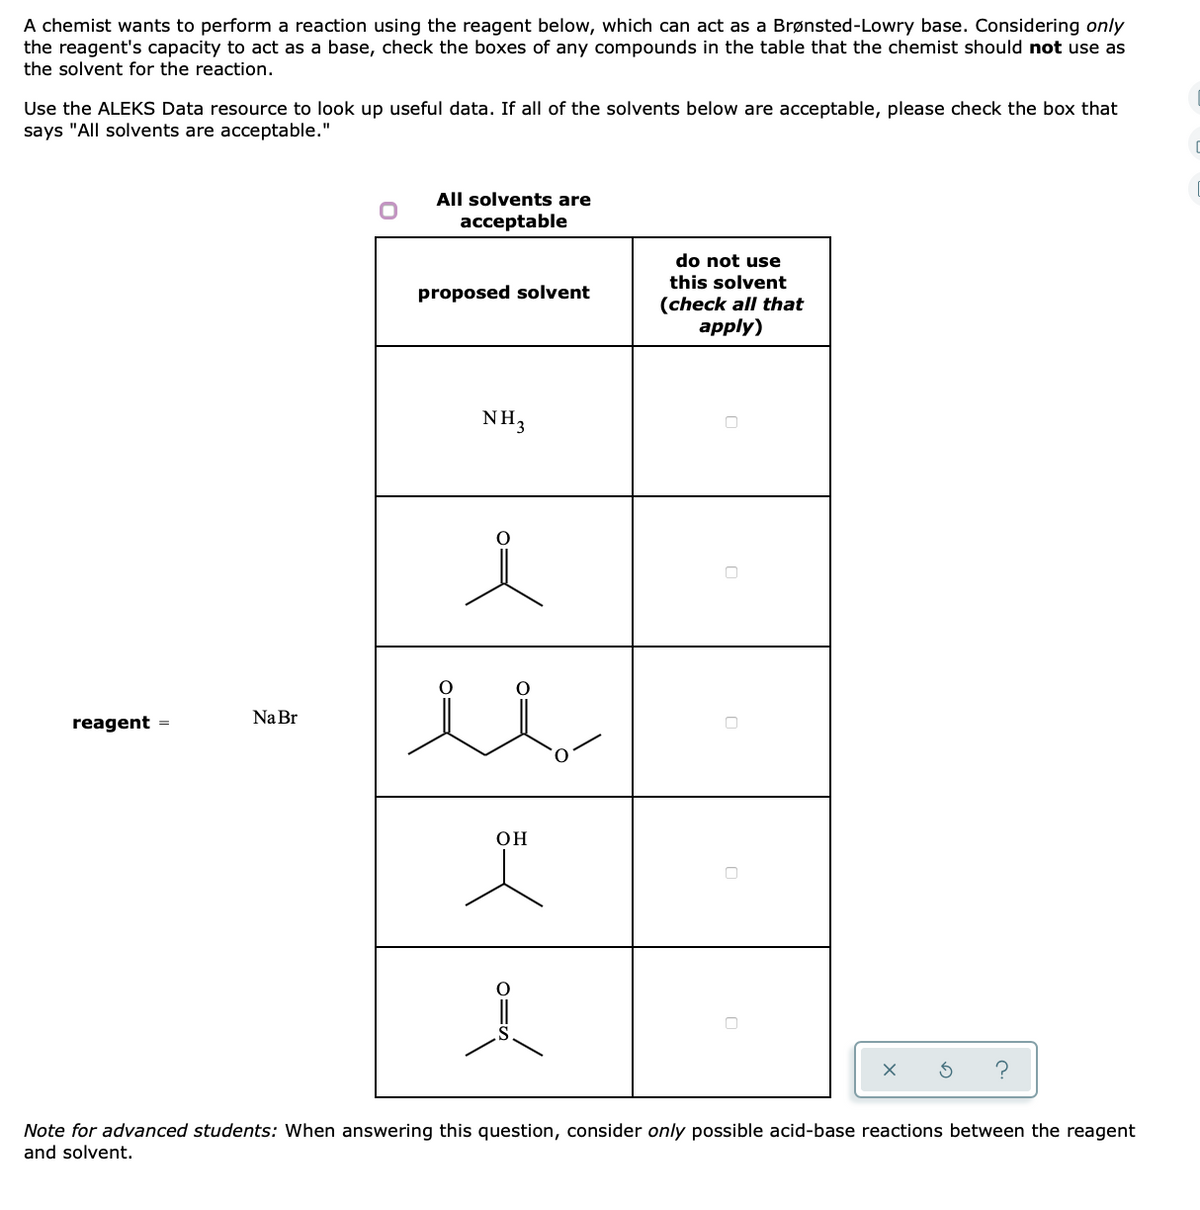 A chemist wants to perform a reaction using the reagent below, which can act as a Brønsted-Lowry base. Considering only
the reagent's capacity to act as a base, check the boxes of any compounds in the table that the chemist should not use as
the solvent for the reaction.
Use the ALEKS Data resource to look up useful data. If all of the solvents below are acceptable, please check the box that
says "All solvents are acceptable."
All solvents are
acceptable
do not use
this solvent
proposed solvent
(check all that
apply)
NH3
Na Br
reagent =
OH
Note for advanced students: When answering this question, consider only possible acid-base reactions between the reagent
and solvent.
